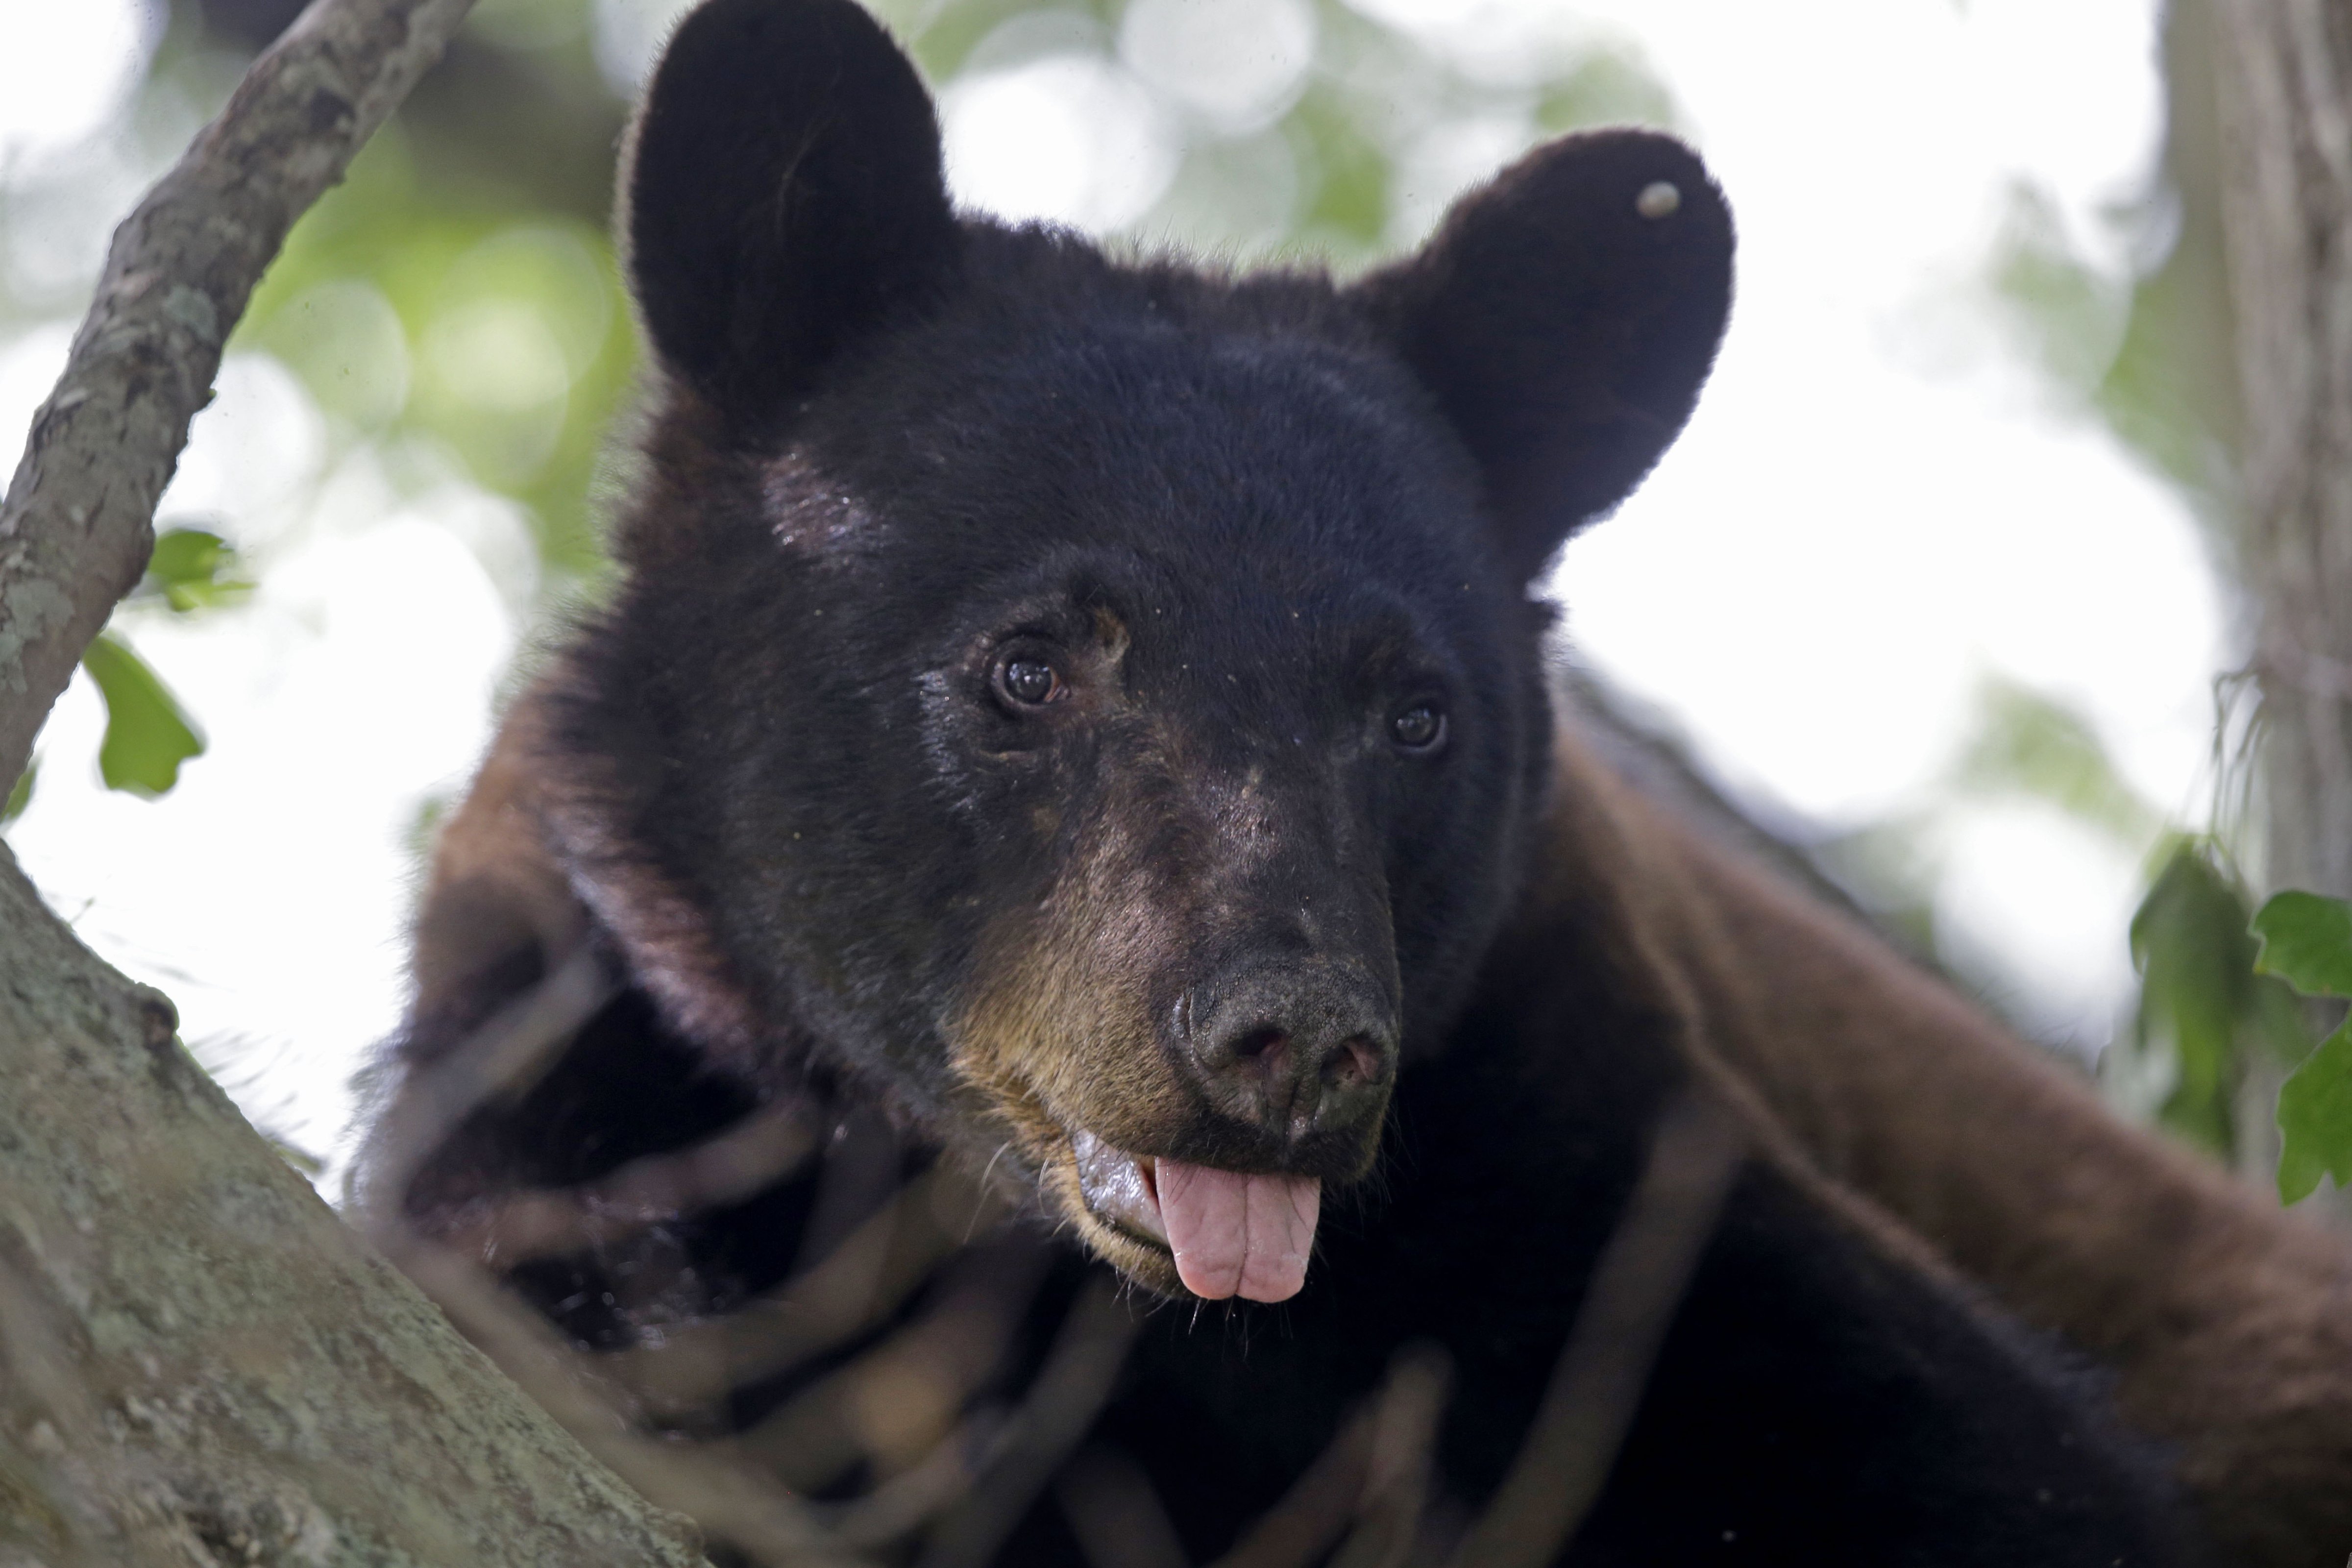 In this May 17, 2015 photo, a Louisiana Black Bear, sub-species of the black bear that is protected under the Endangered Species Act, is seen in a water oak tree in Marksville, La.